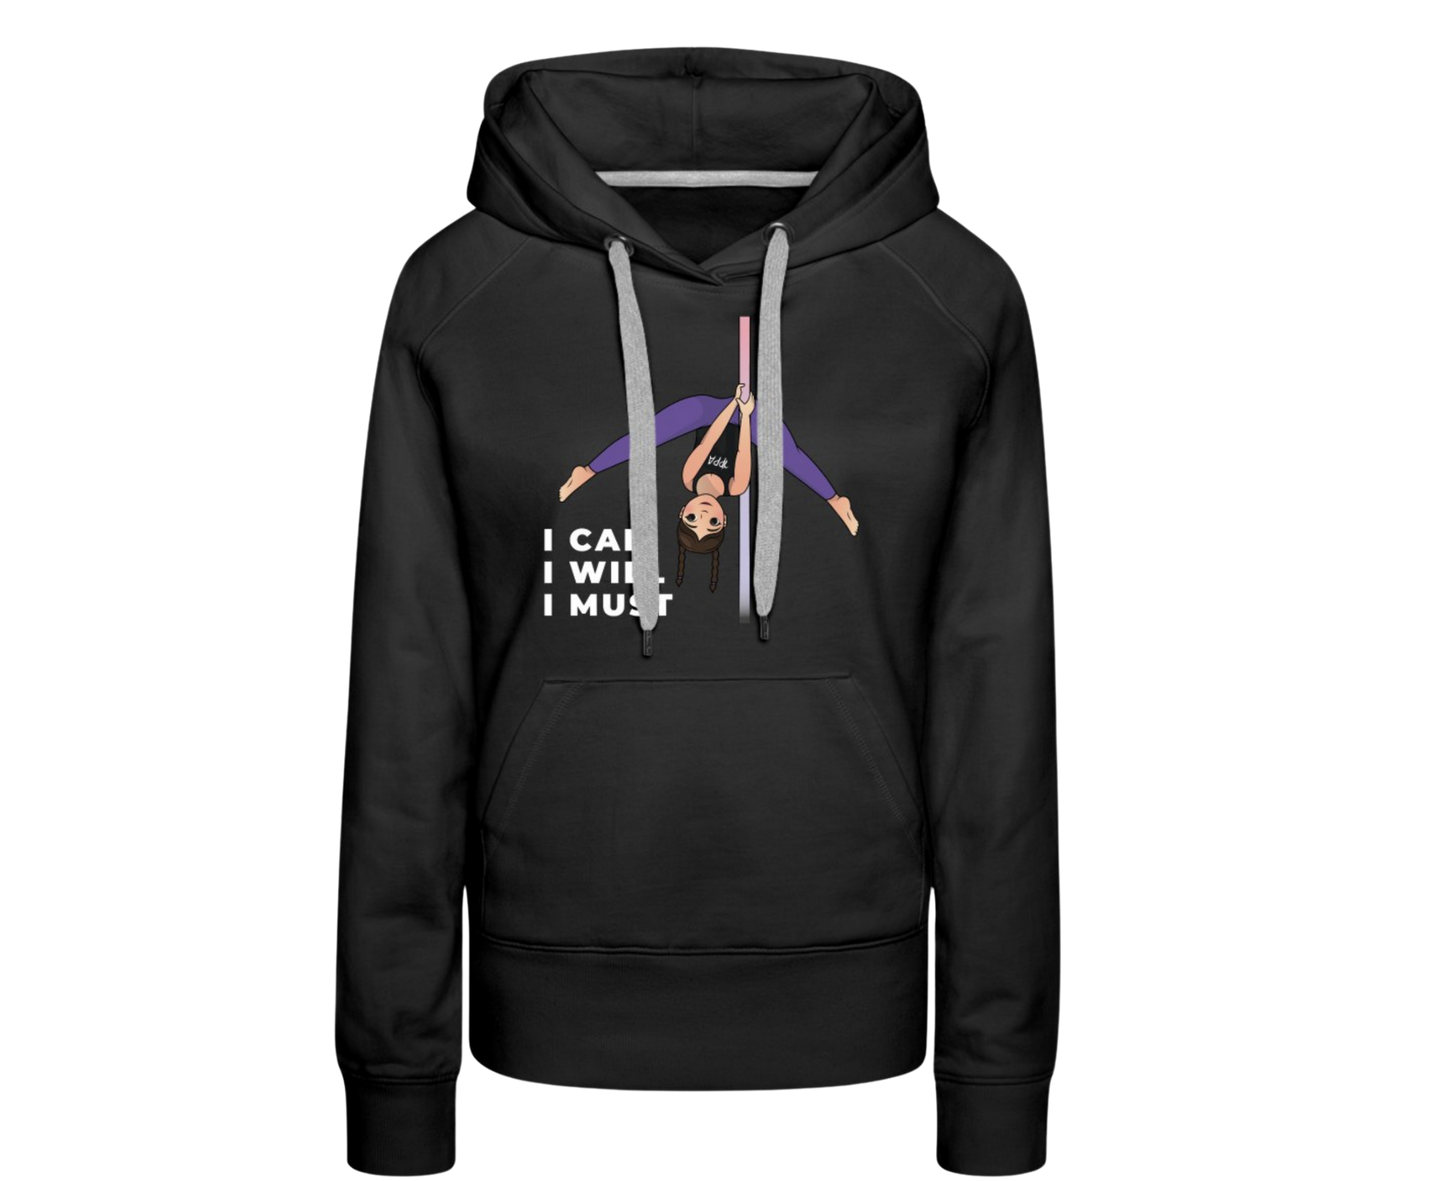 Hoodies - I can I will I must